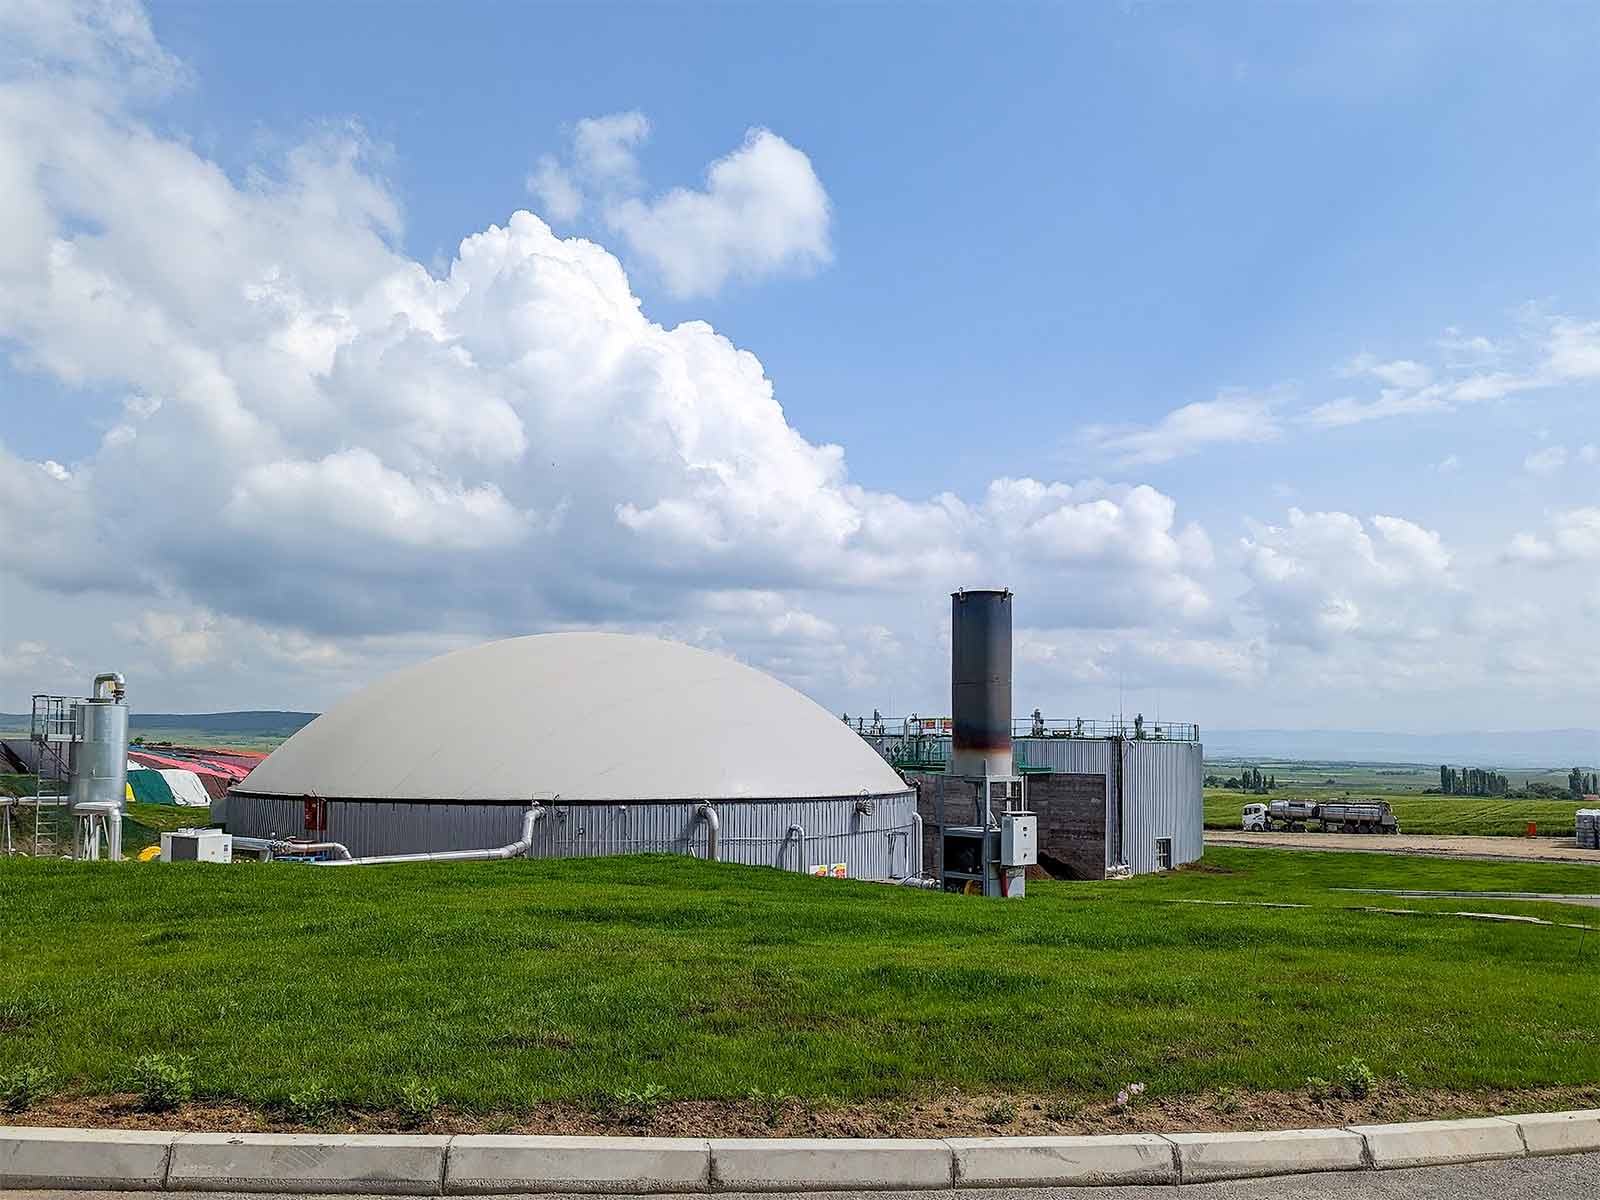 The biogas collected in the digesters is used to generate electricity and thermal energy. Approximately 30,000 t of natural fertilizer are obtained as a by-product of the biological processes. (Photograph: Provided by Feroinvest Group)